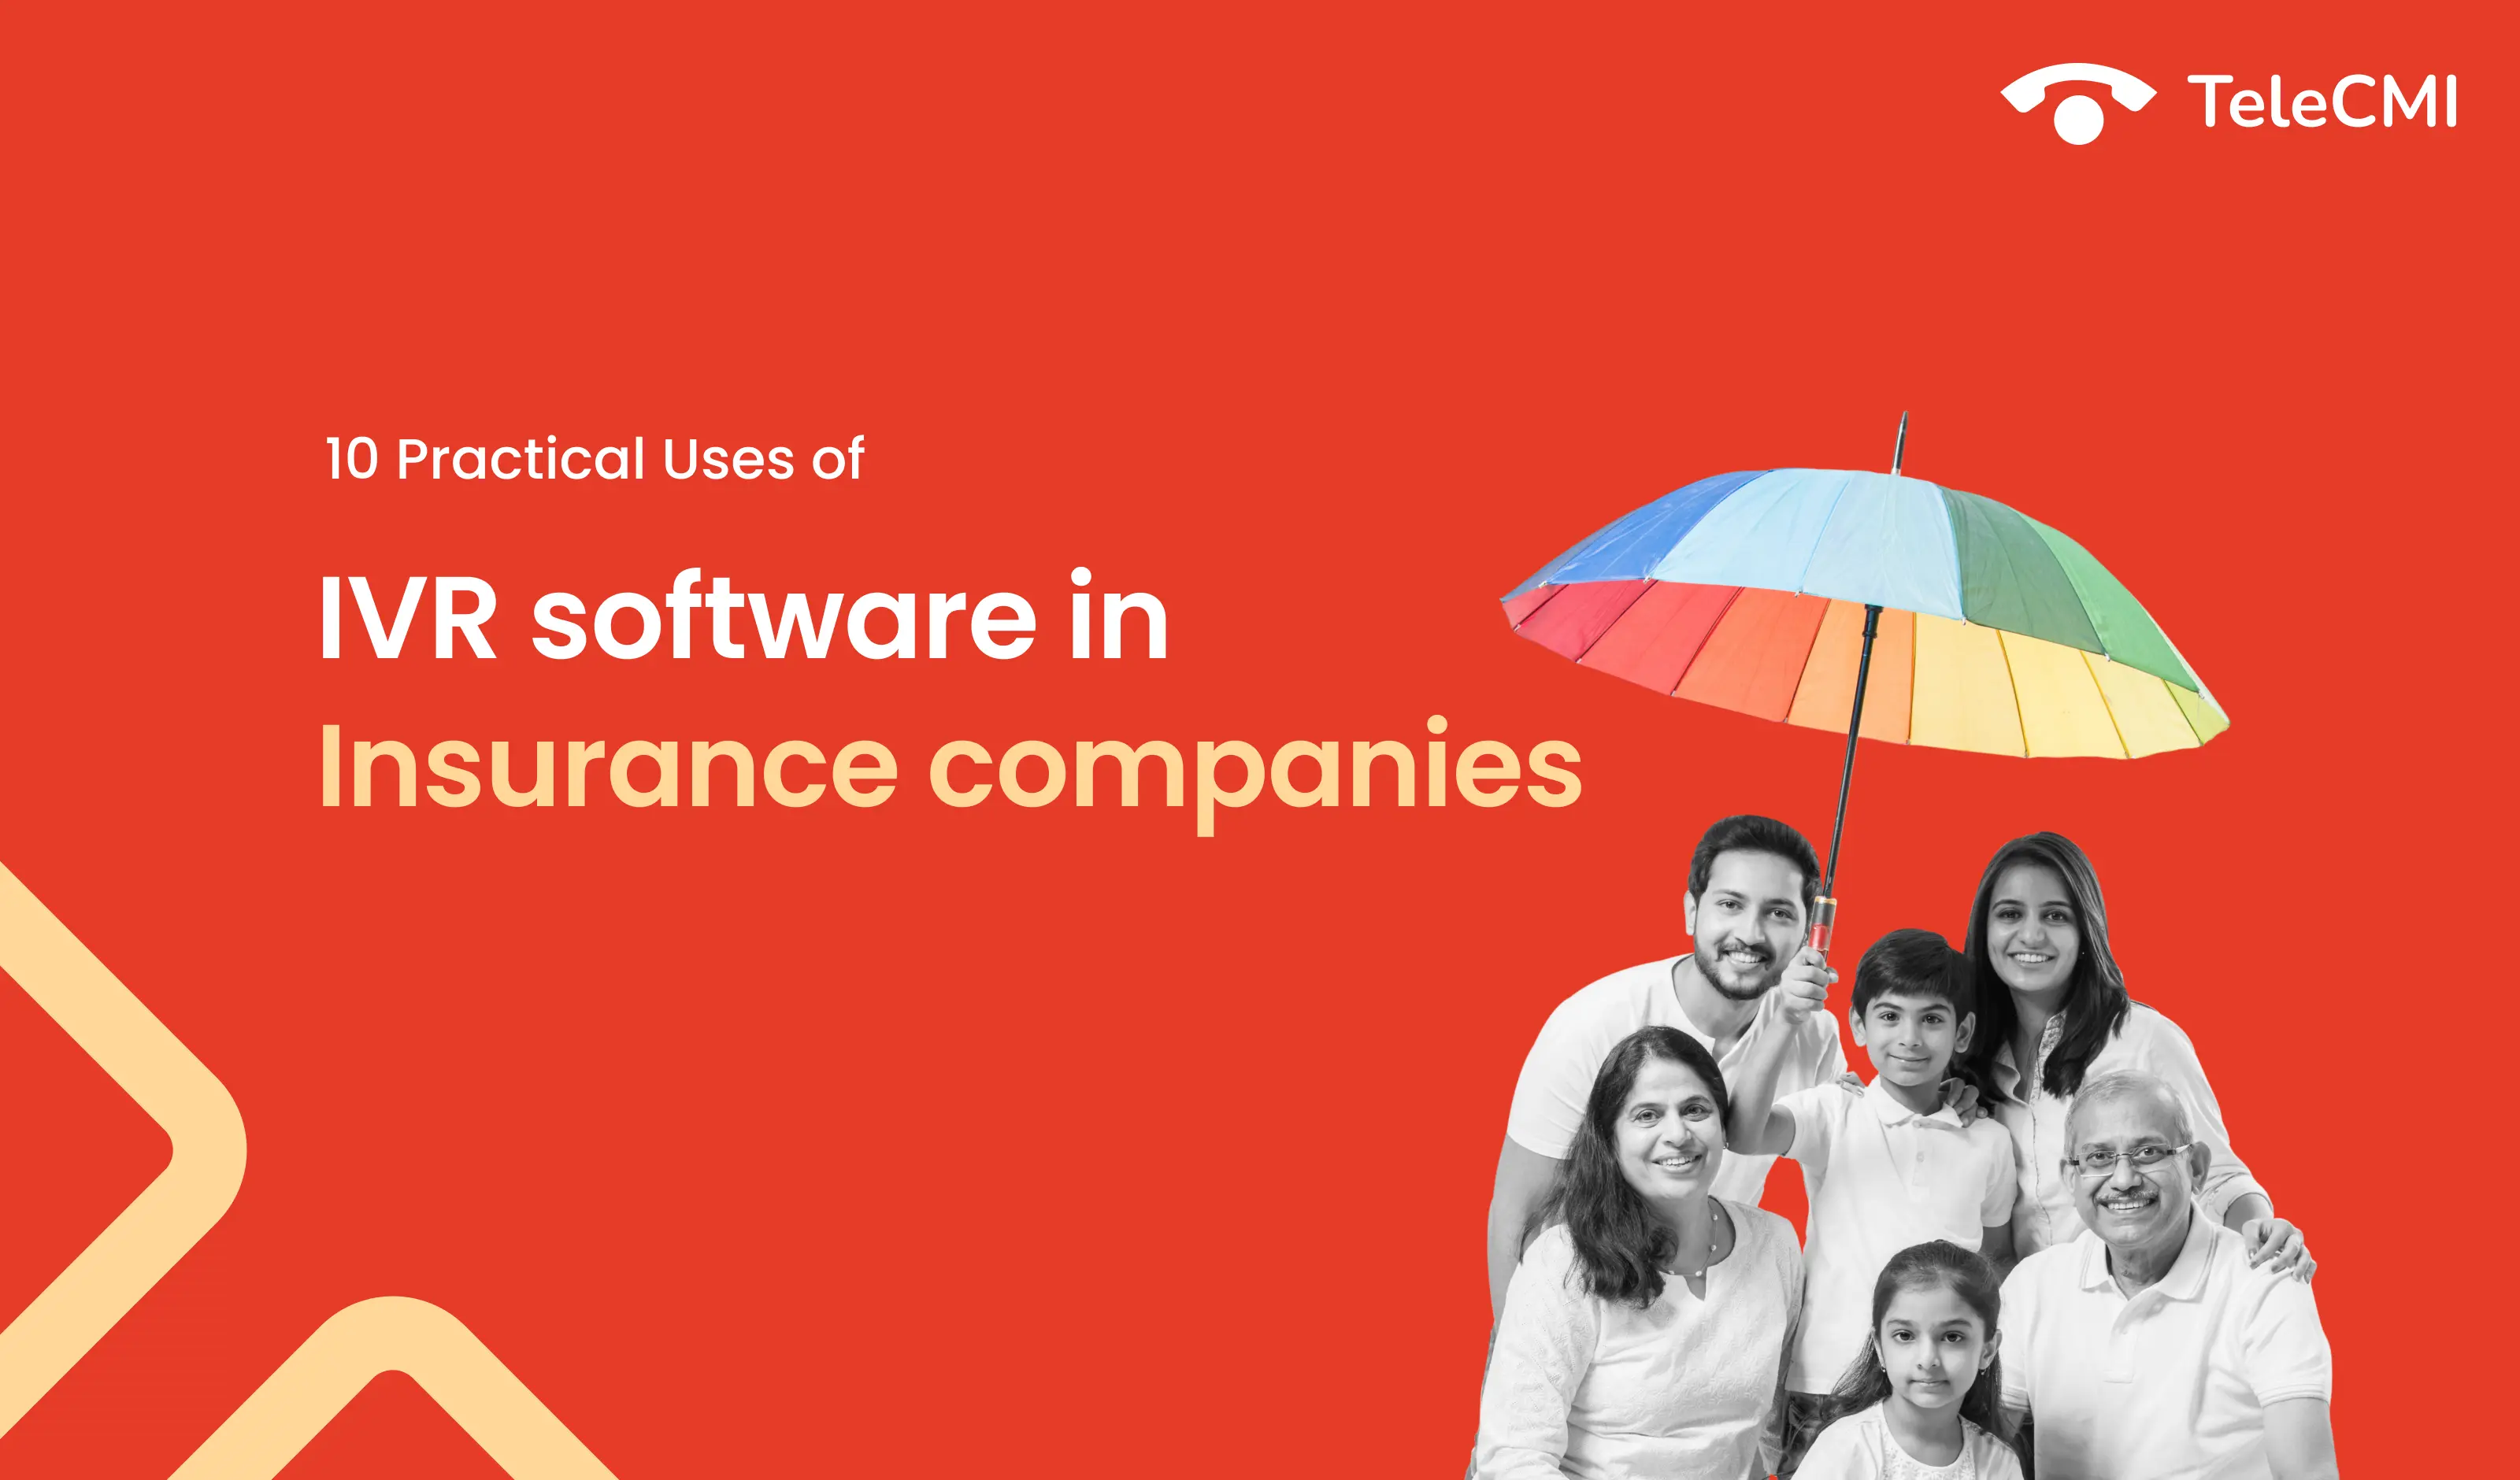 10 Practical Uses of IVR Software in Insurance Companies